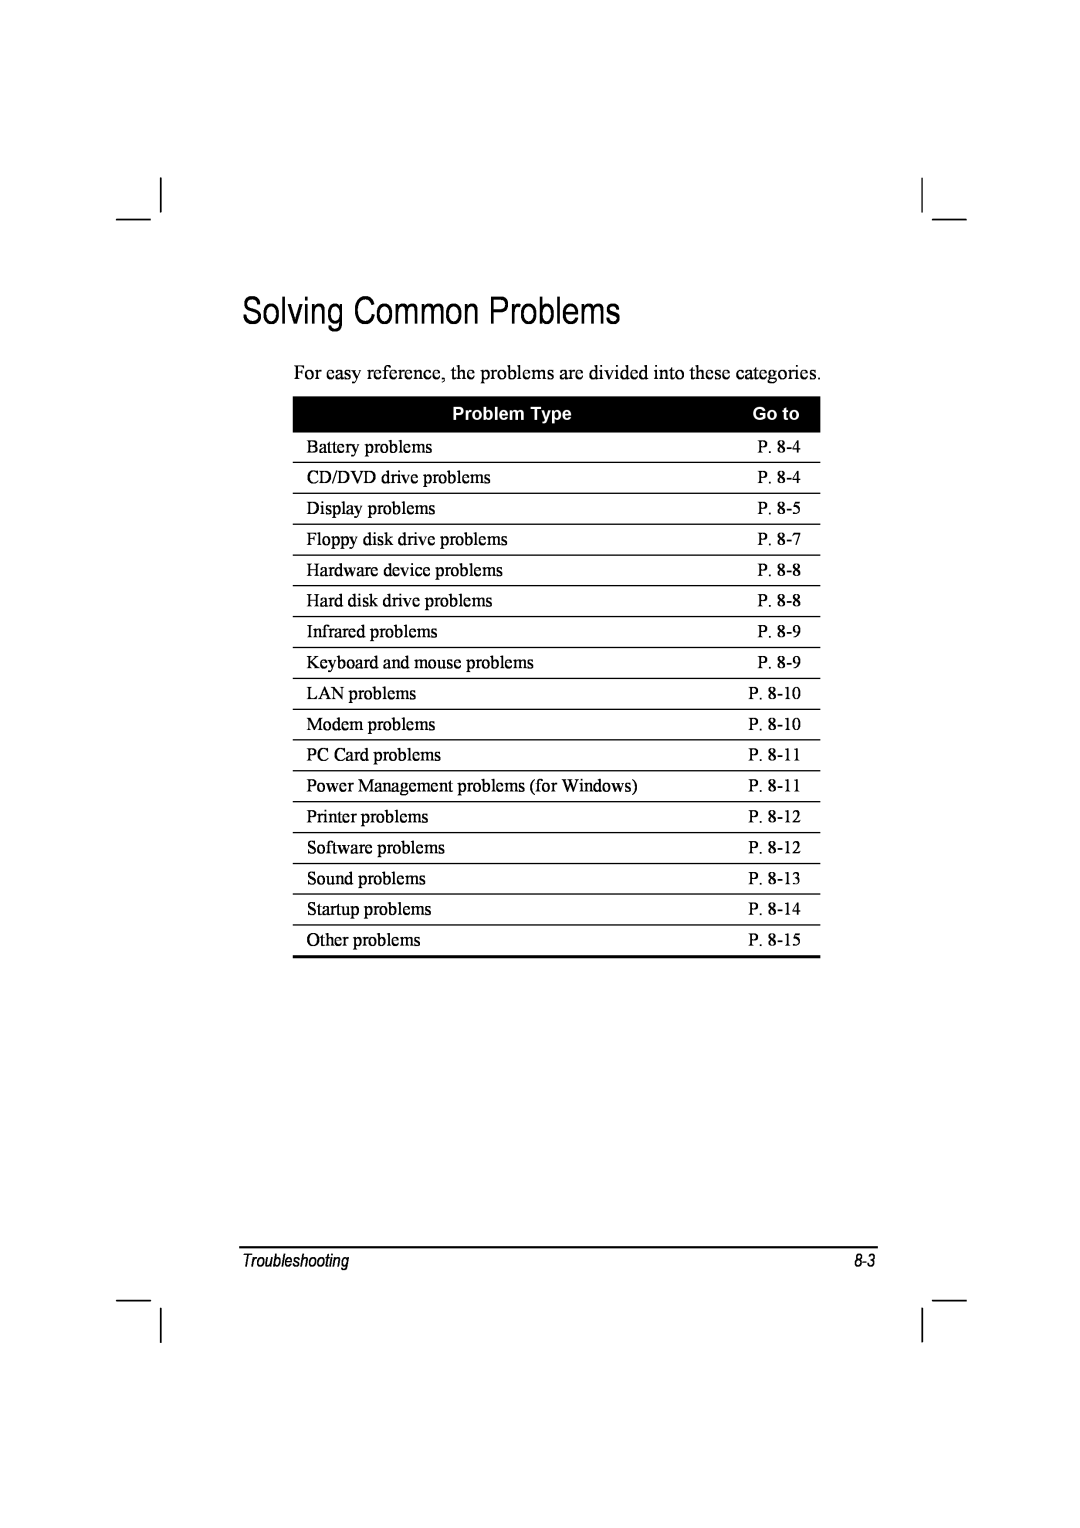 TAG 10 Solving Common Problems, For easy reference, the problems are divided into these categories, Problem Type, Go to 